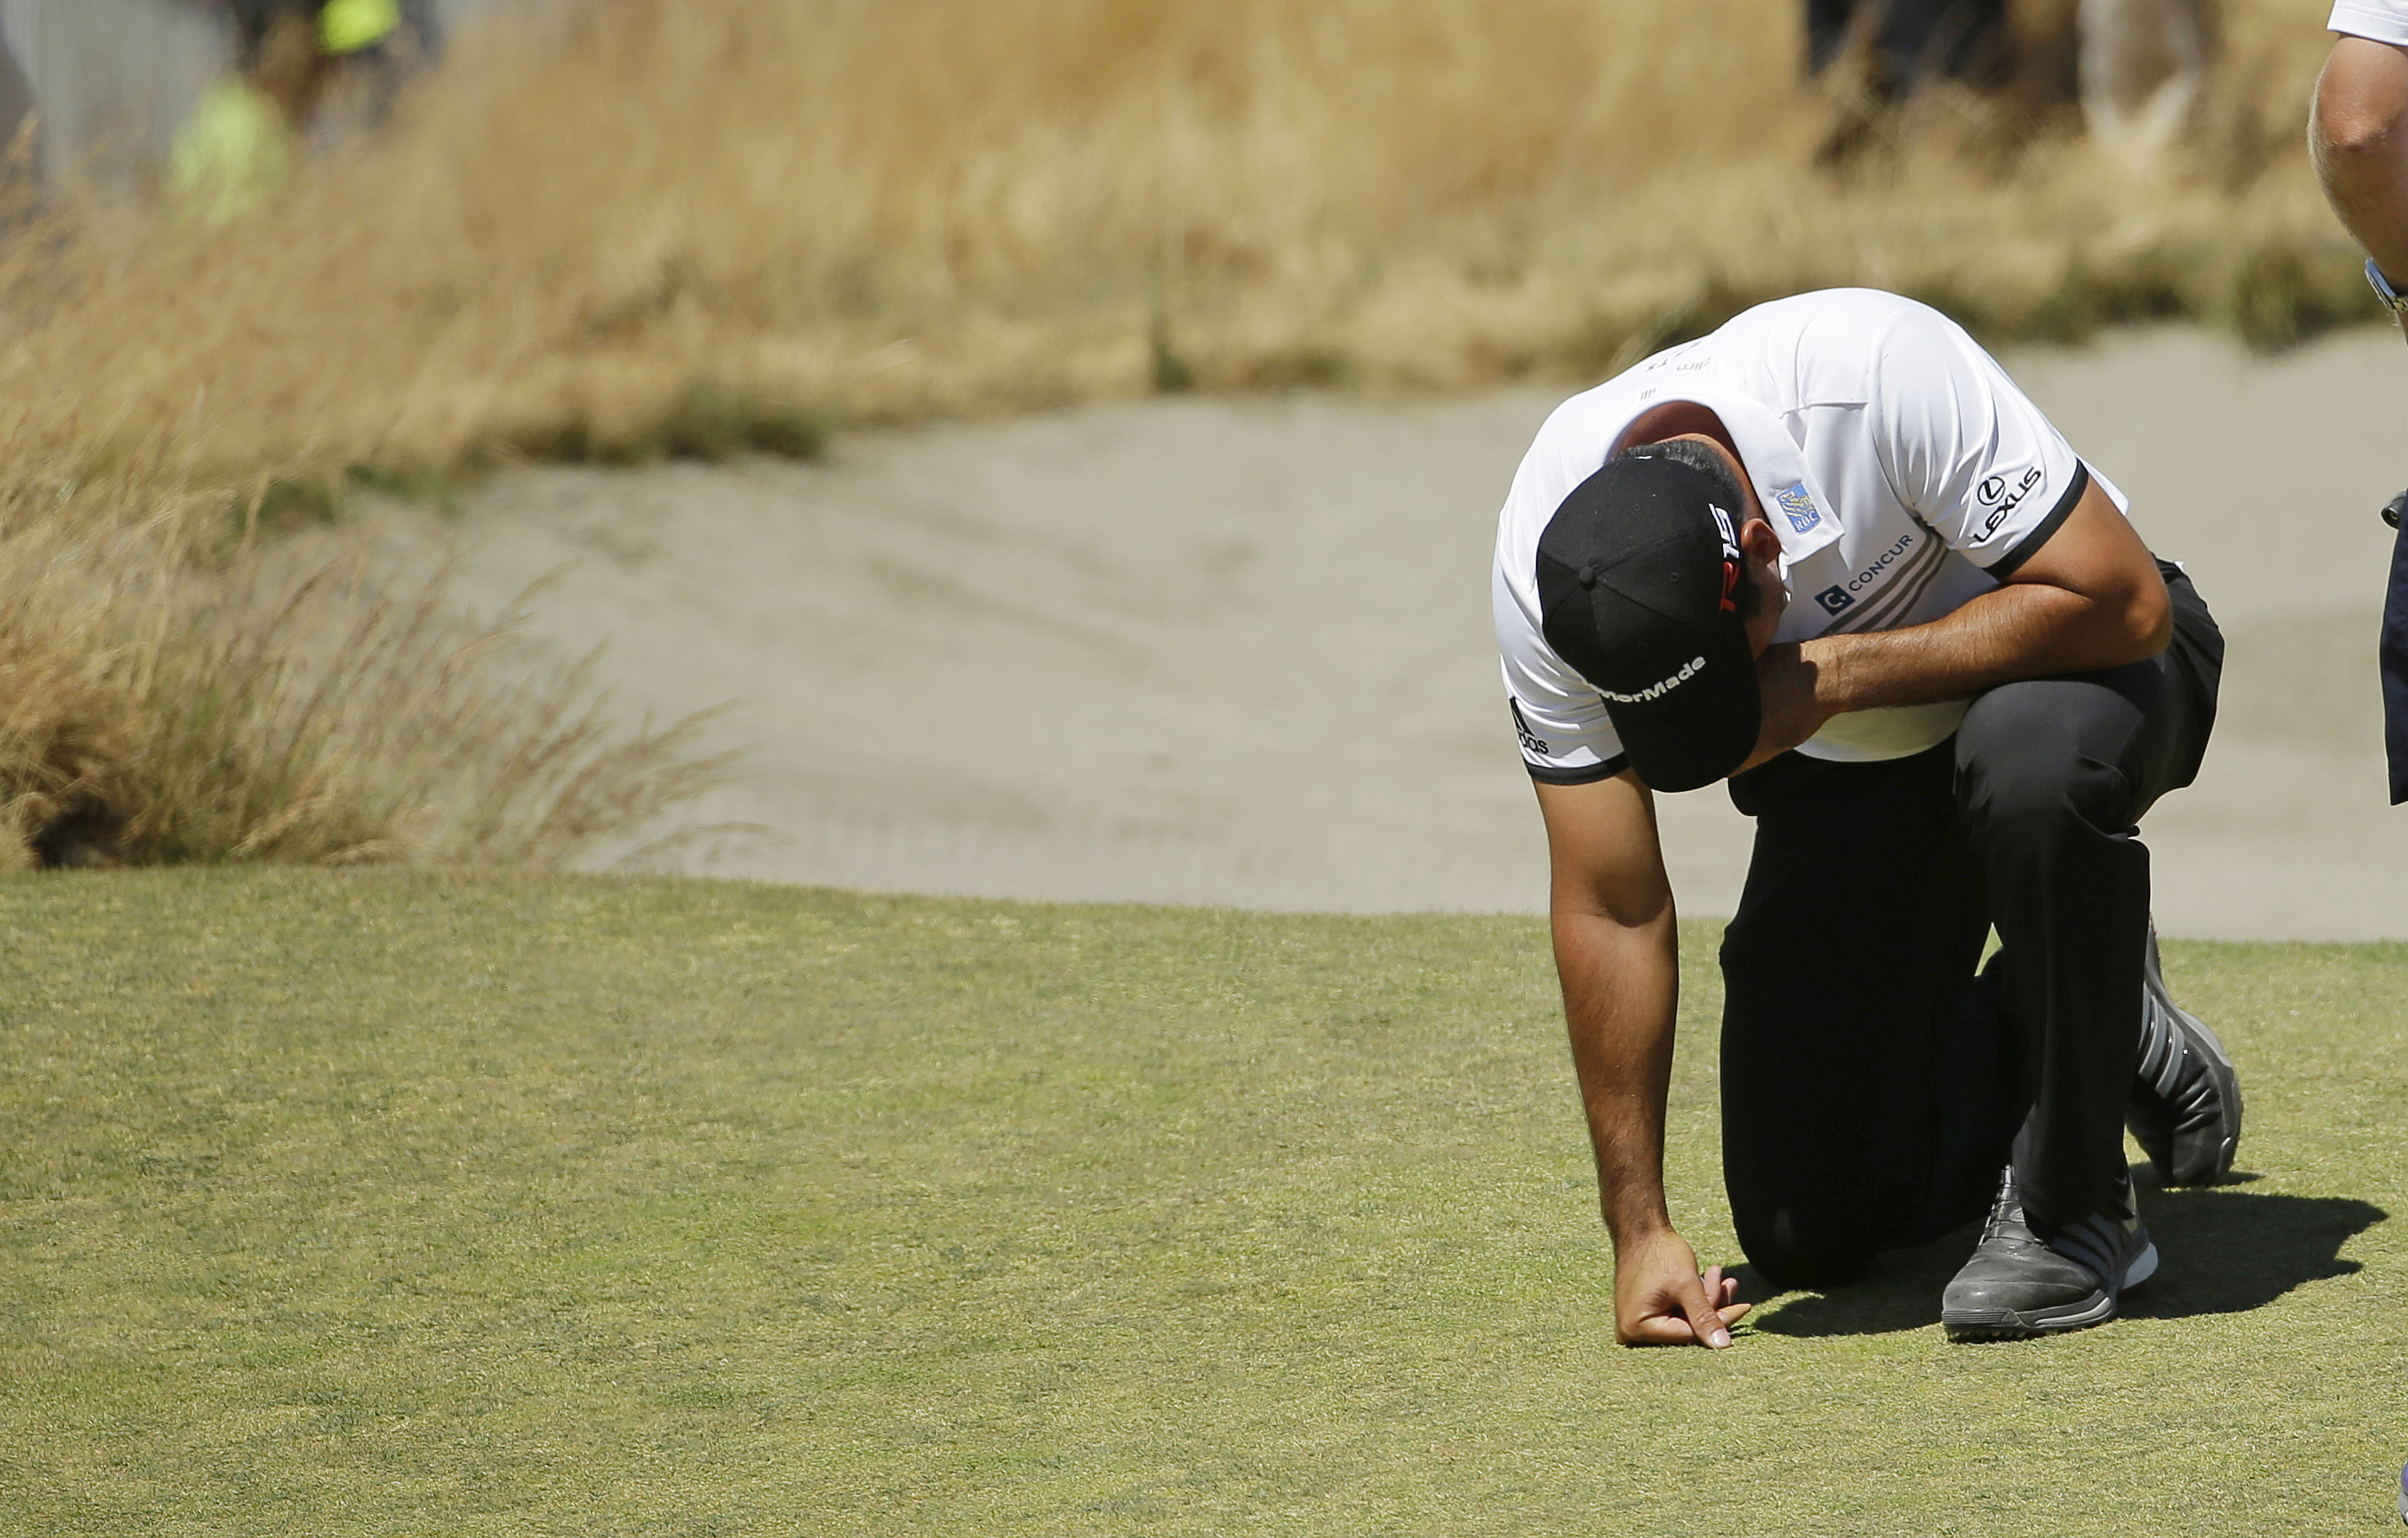 Jason Day, of Australia, kneels while waiting to putt on the ninth hole after having collapsed earlier in the fairway during the second round of the U.S. Open golf tournament at Chambers Bay on Friday, June 19, 2015 in University Place, Wash. (AP Photo/Ted S. Warren)